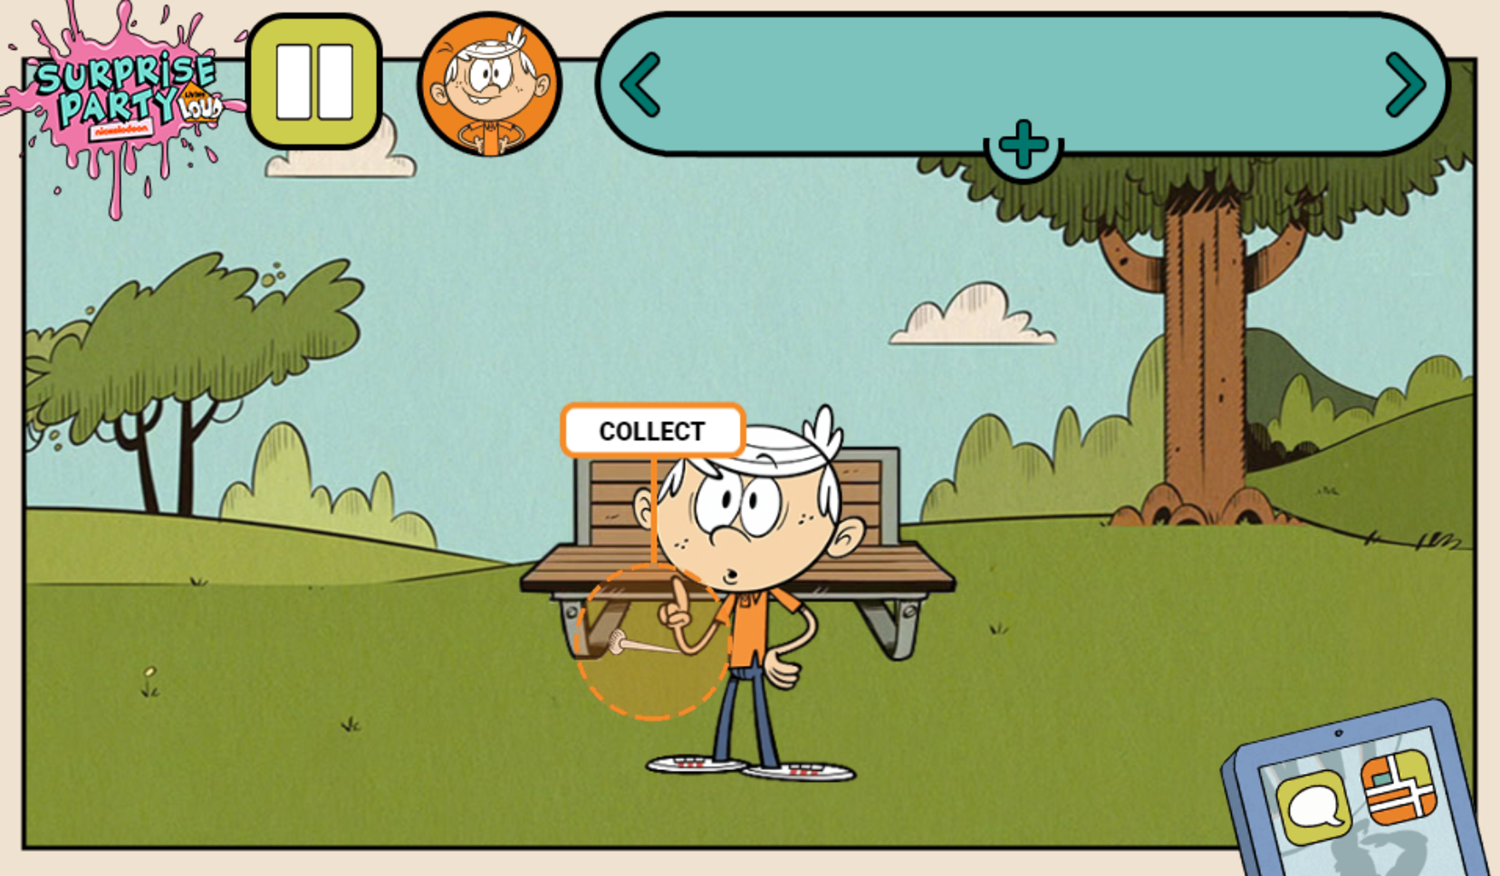 Loud House Surprise Party Game Screenshot.